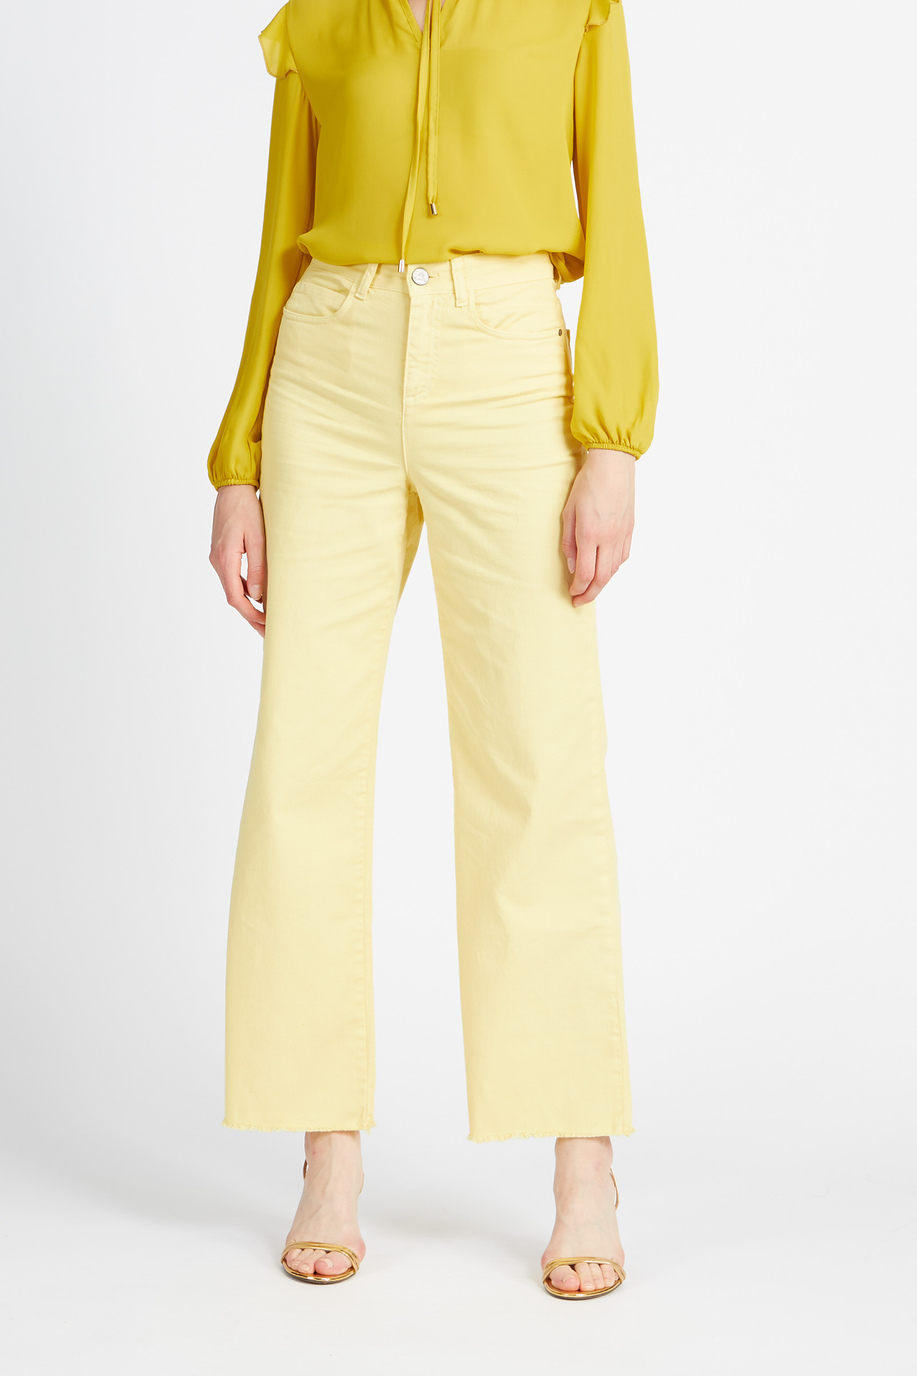 Women's 5-pocket jeans trousers in solid color Spring Weekend - Villard - Preview | La Martina - Official Online Shop